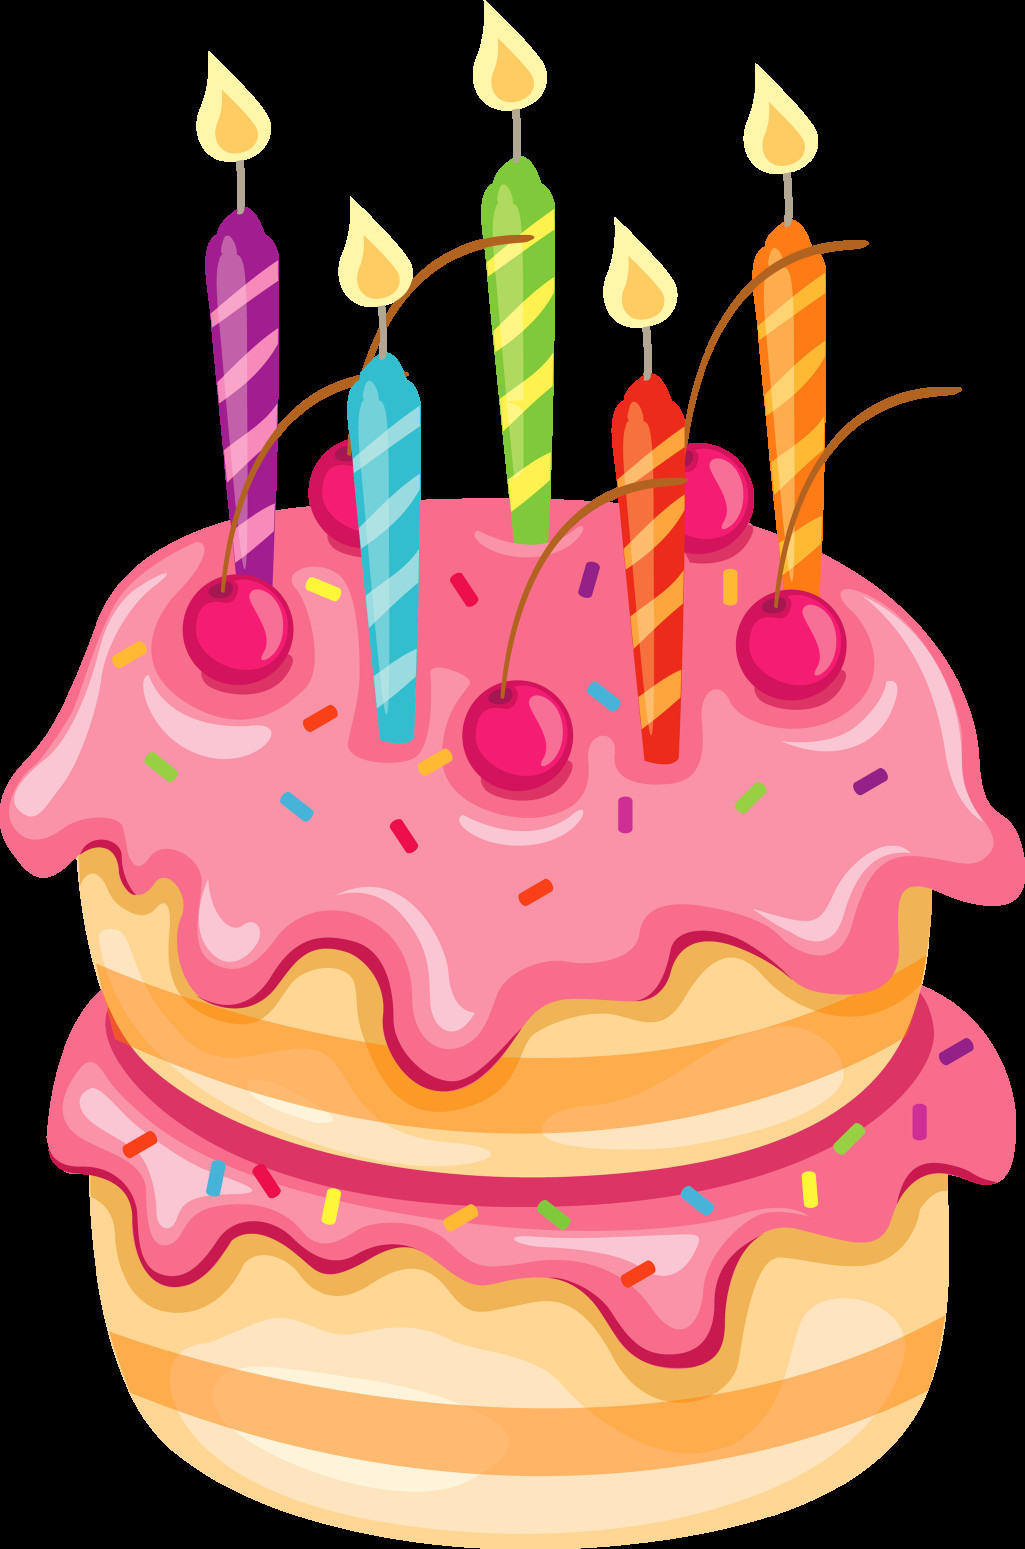 Birthday Cake Clipart
 Pink Cake with Candles PNG Clipart